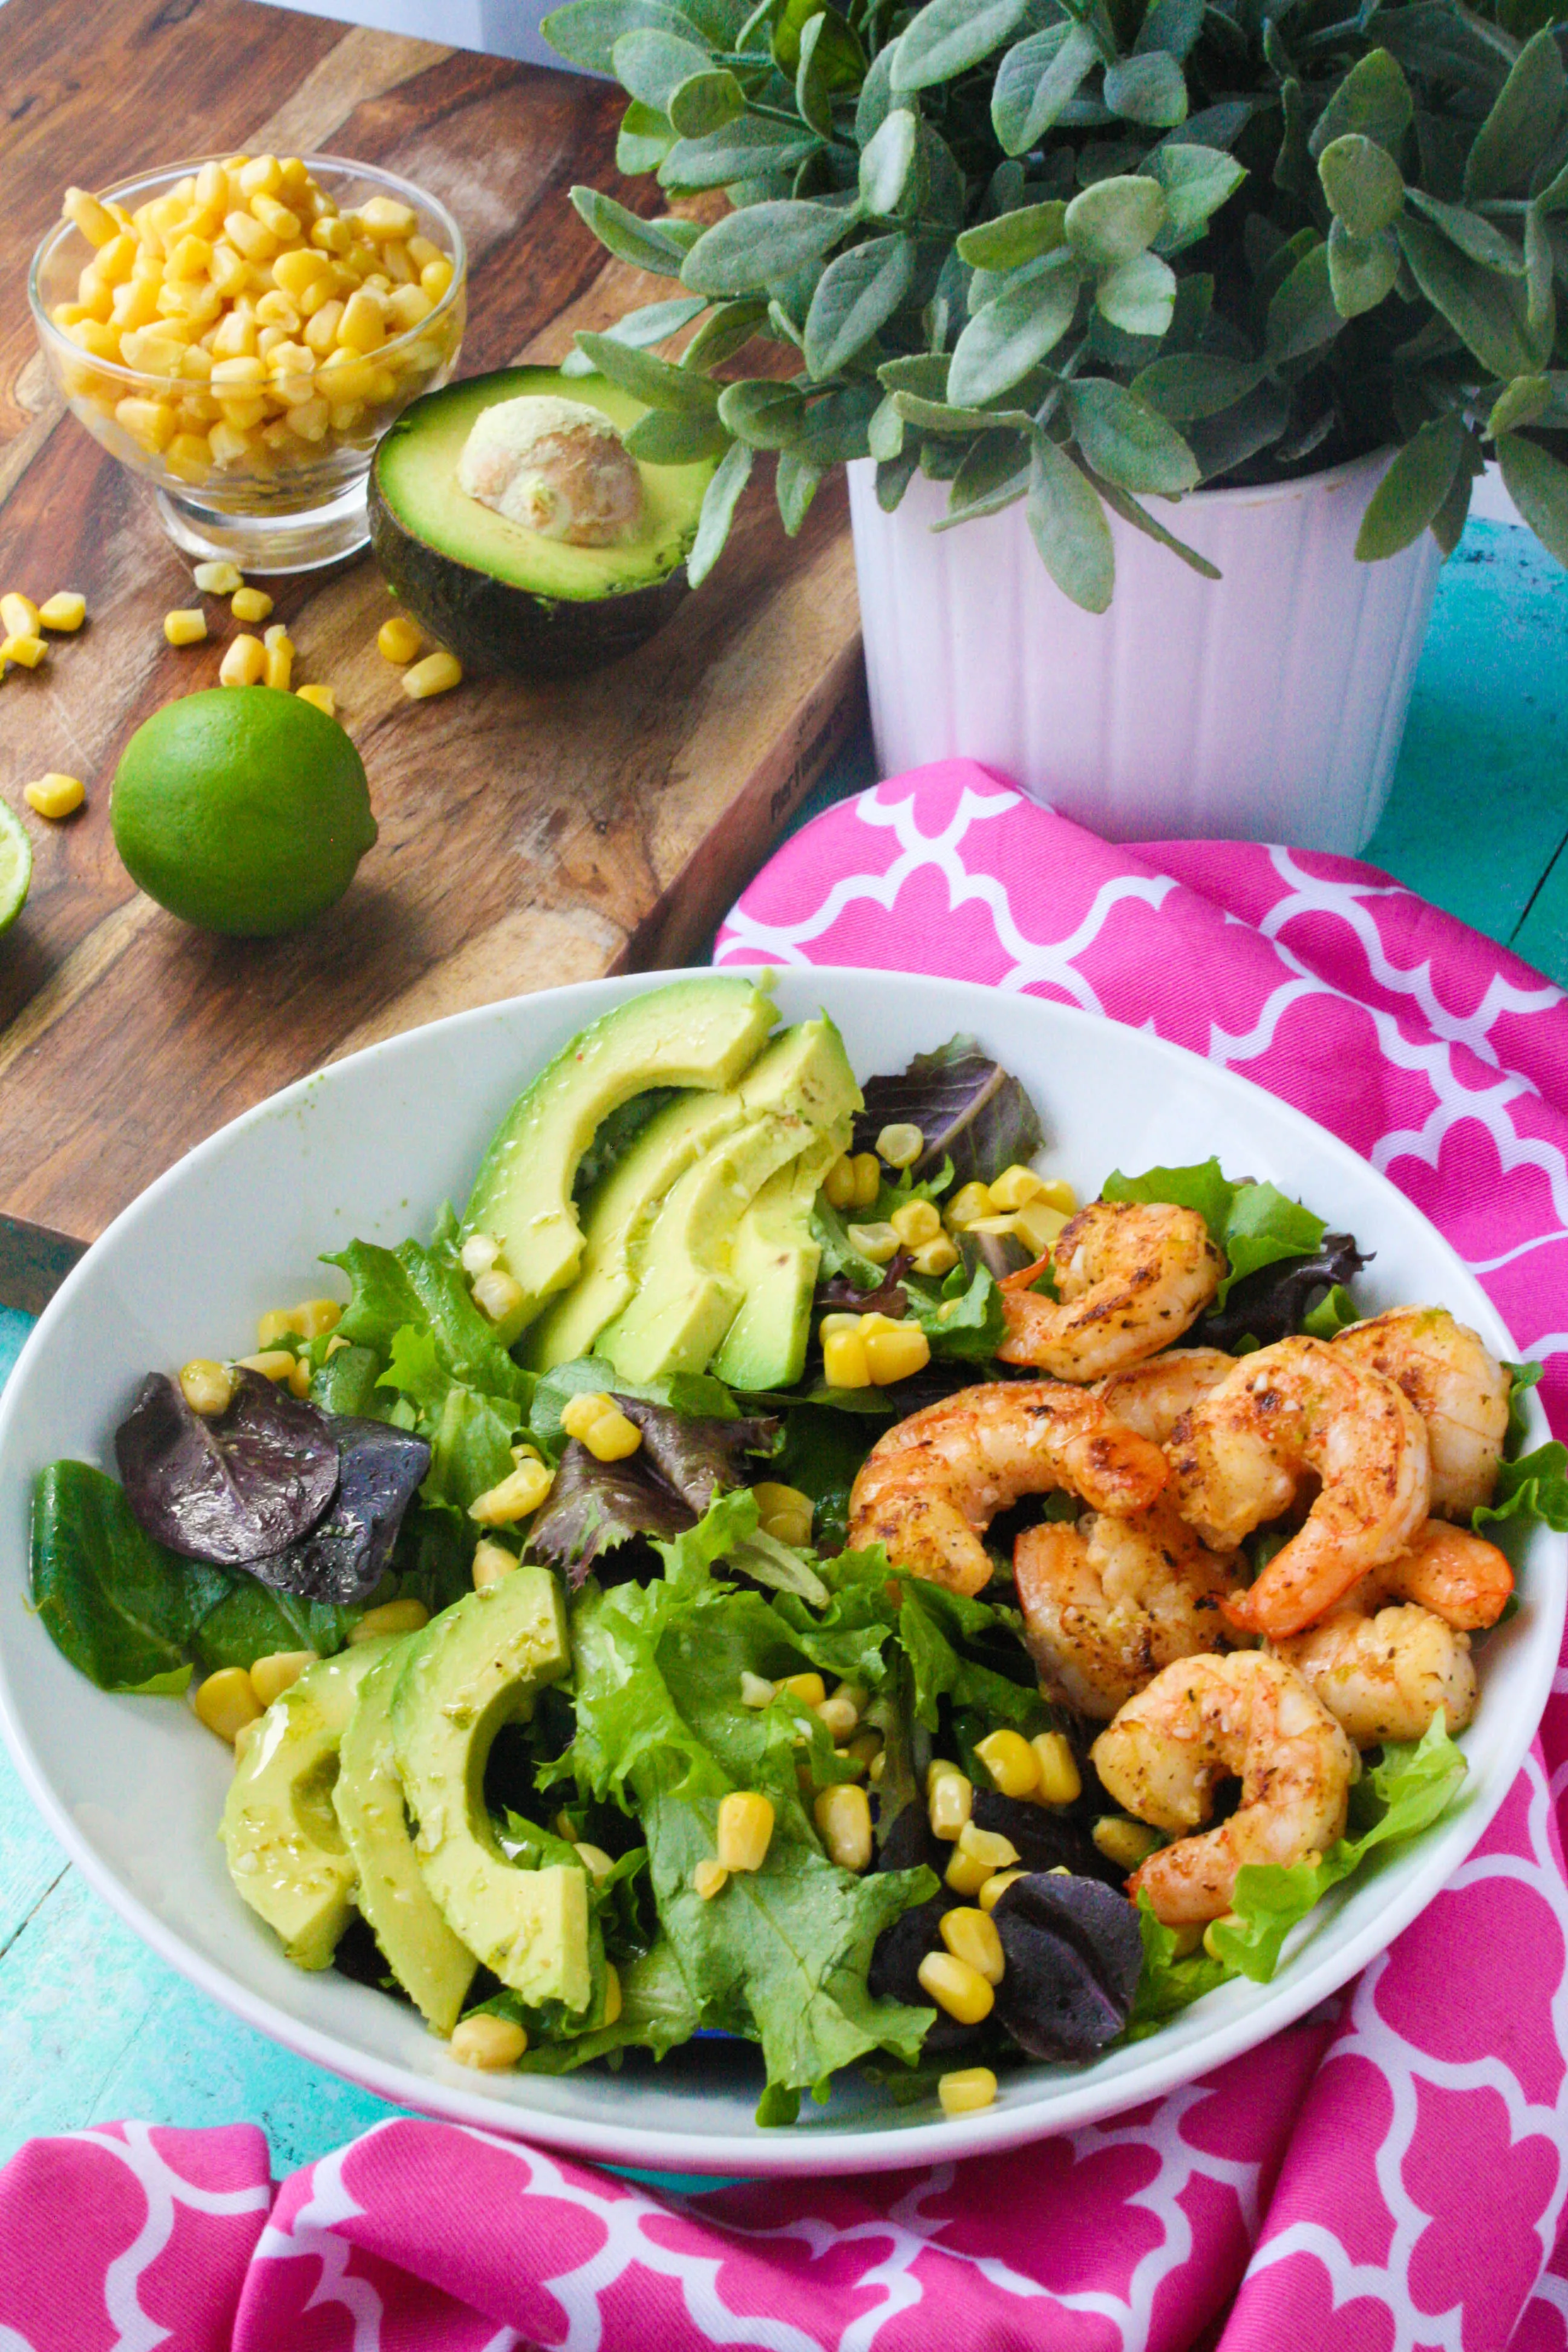 Simple Skillet Shrimp Salad with Lime Vinaigrette is a lovely salad that's easy to put together! Simple Skillet Shrimp Salad with Lime Vinaigrette is filling and flavorful!